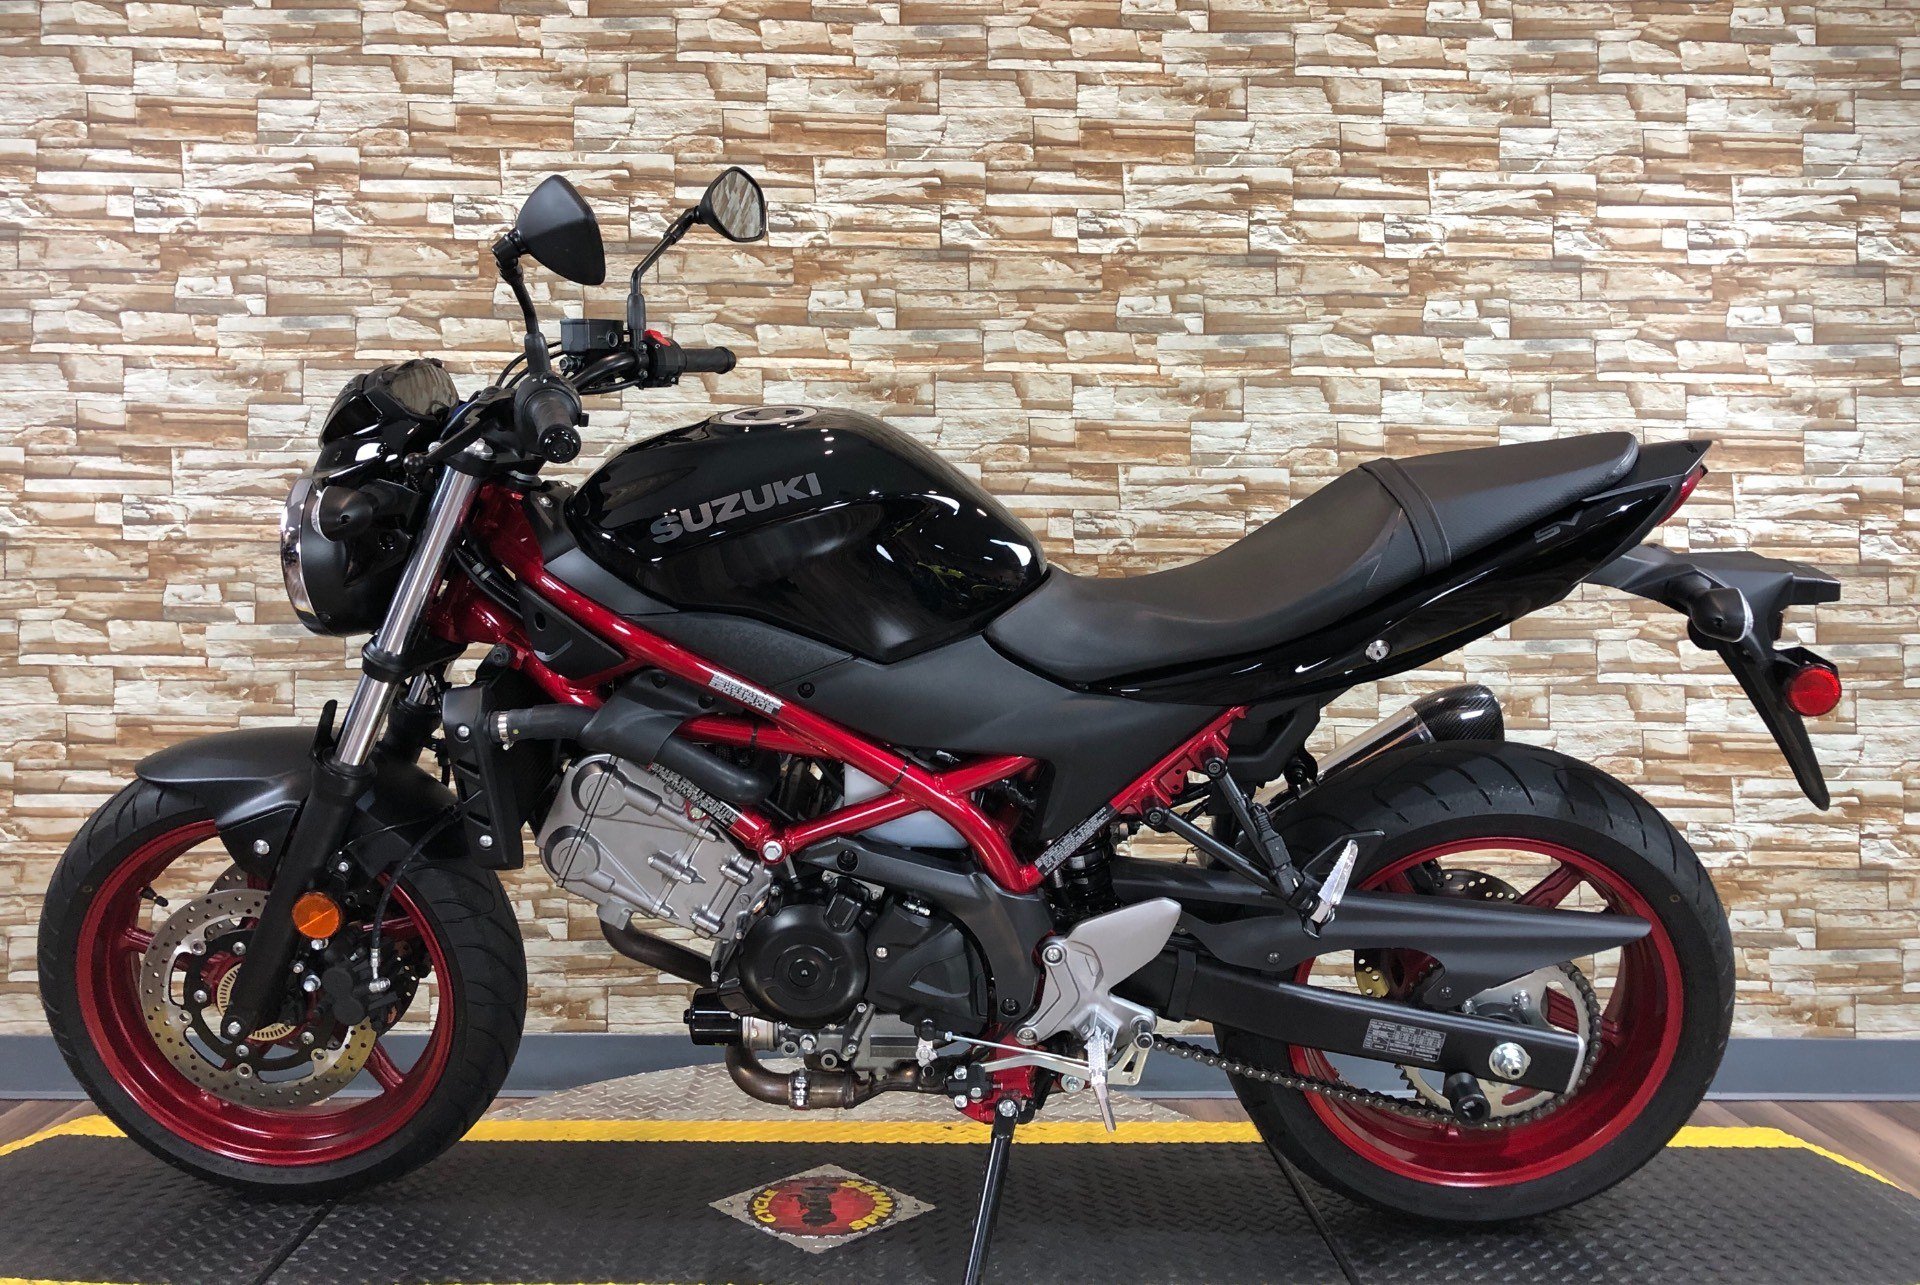 Used 2018 Suzuki SV650 ABS Motorcycles in Port Charlotte